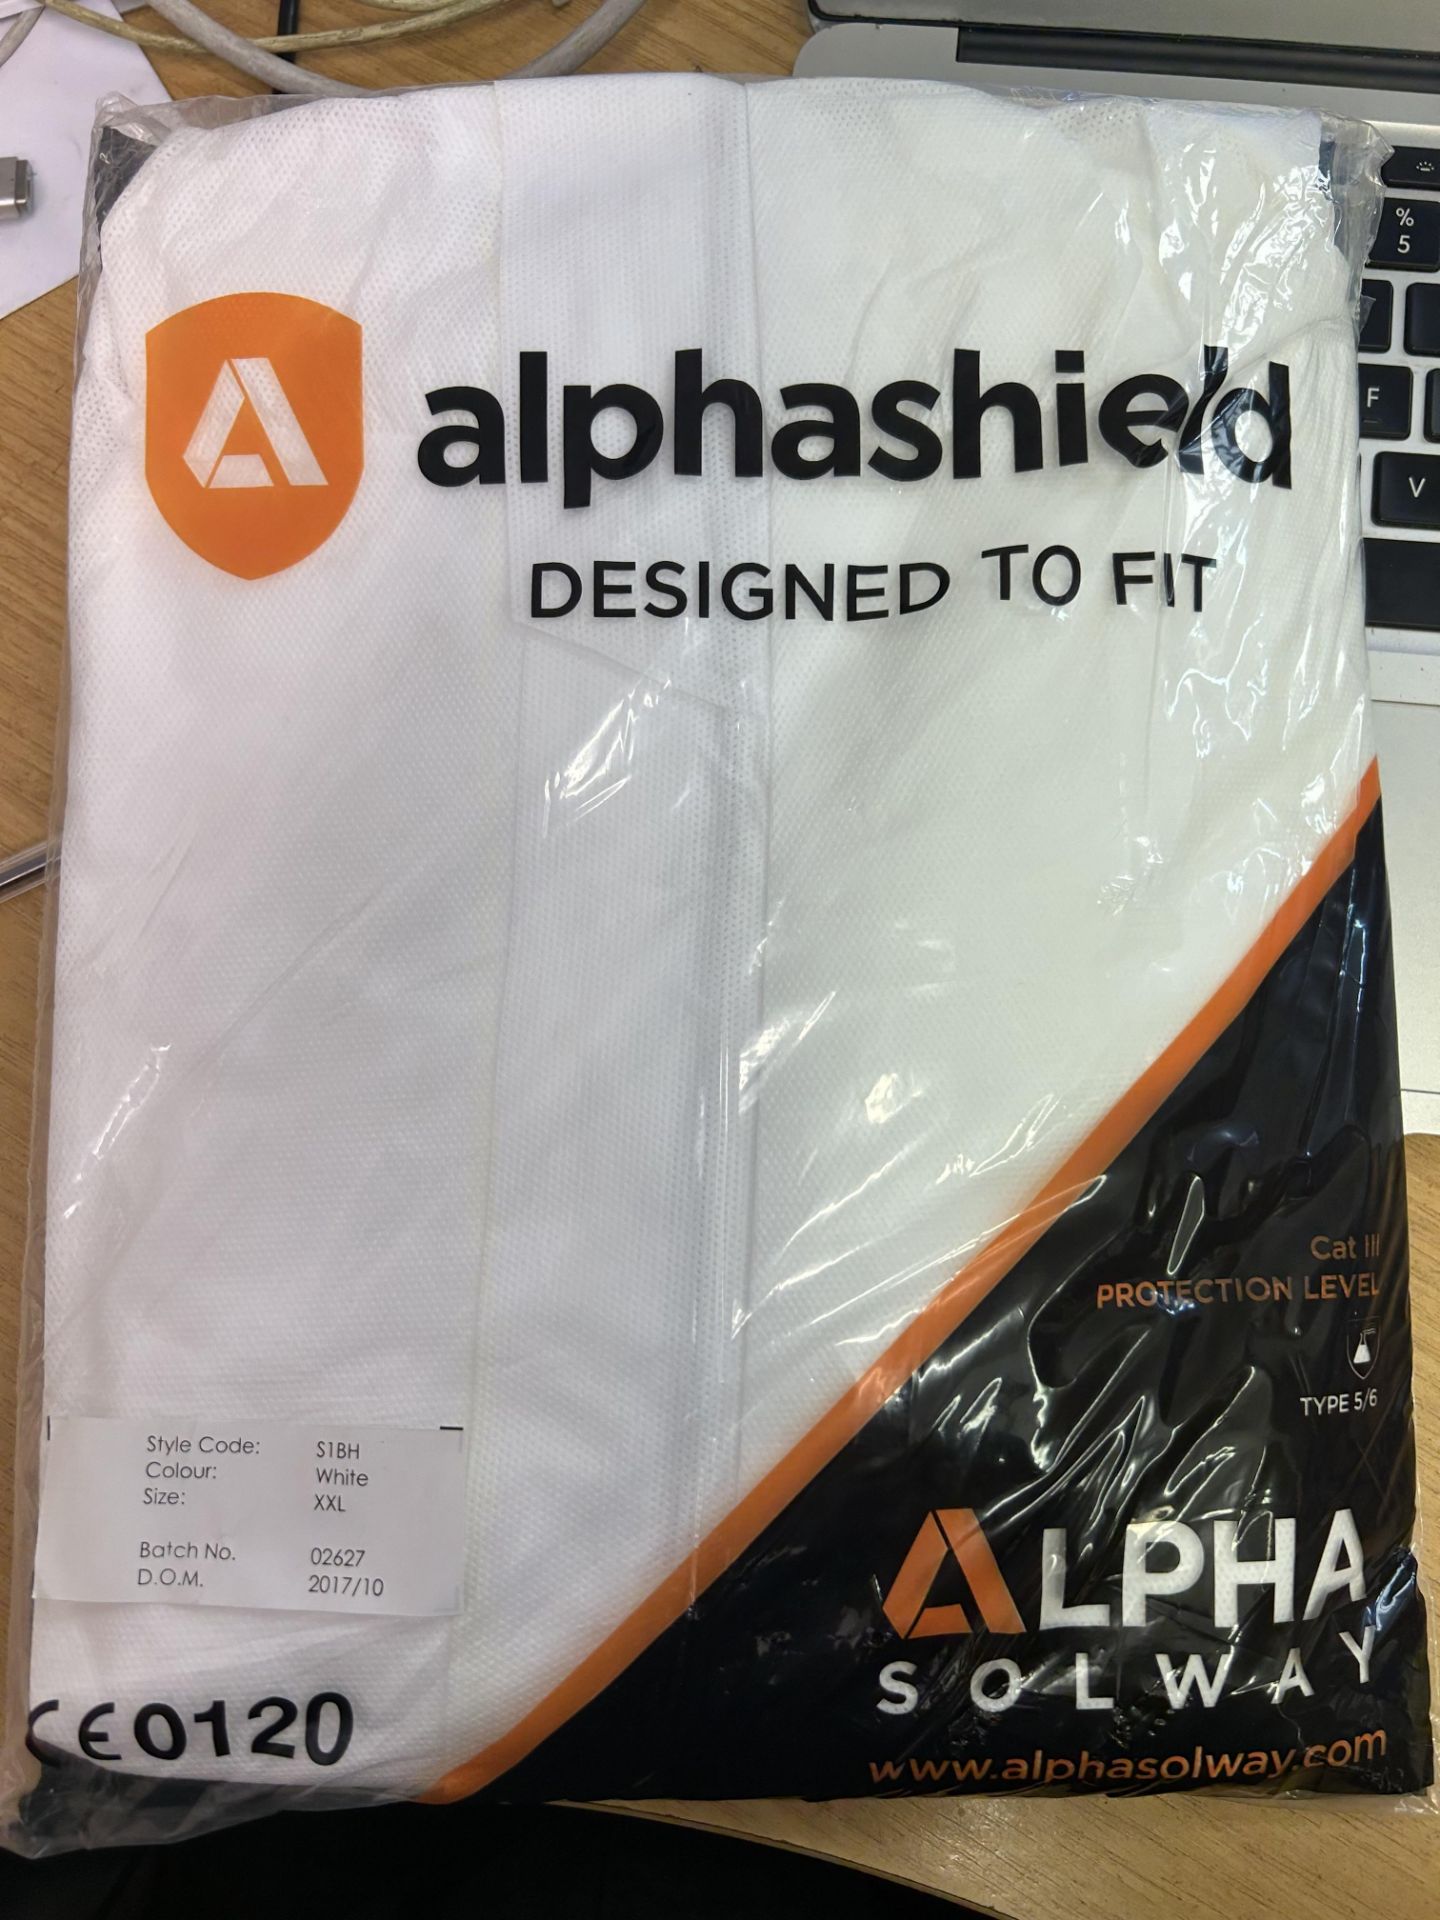 ALPHASHIELD 1000 S1BH DISPOSABLE PROTECTIVE COVERALLS - x650 (expiry date 2027) - Image 2 of 3